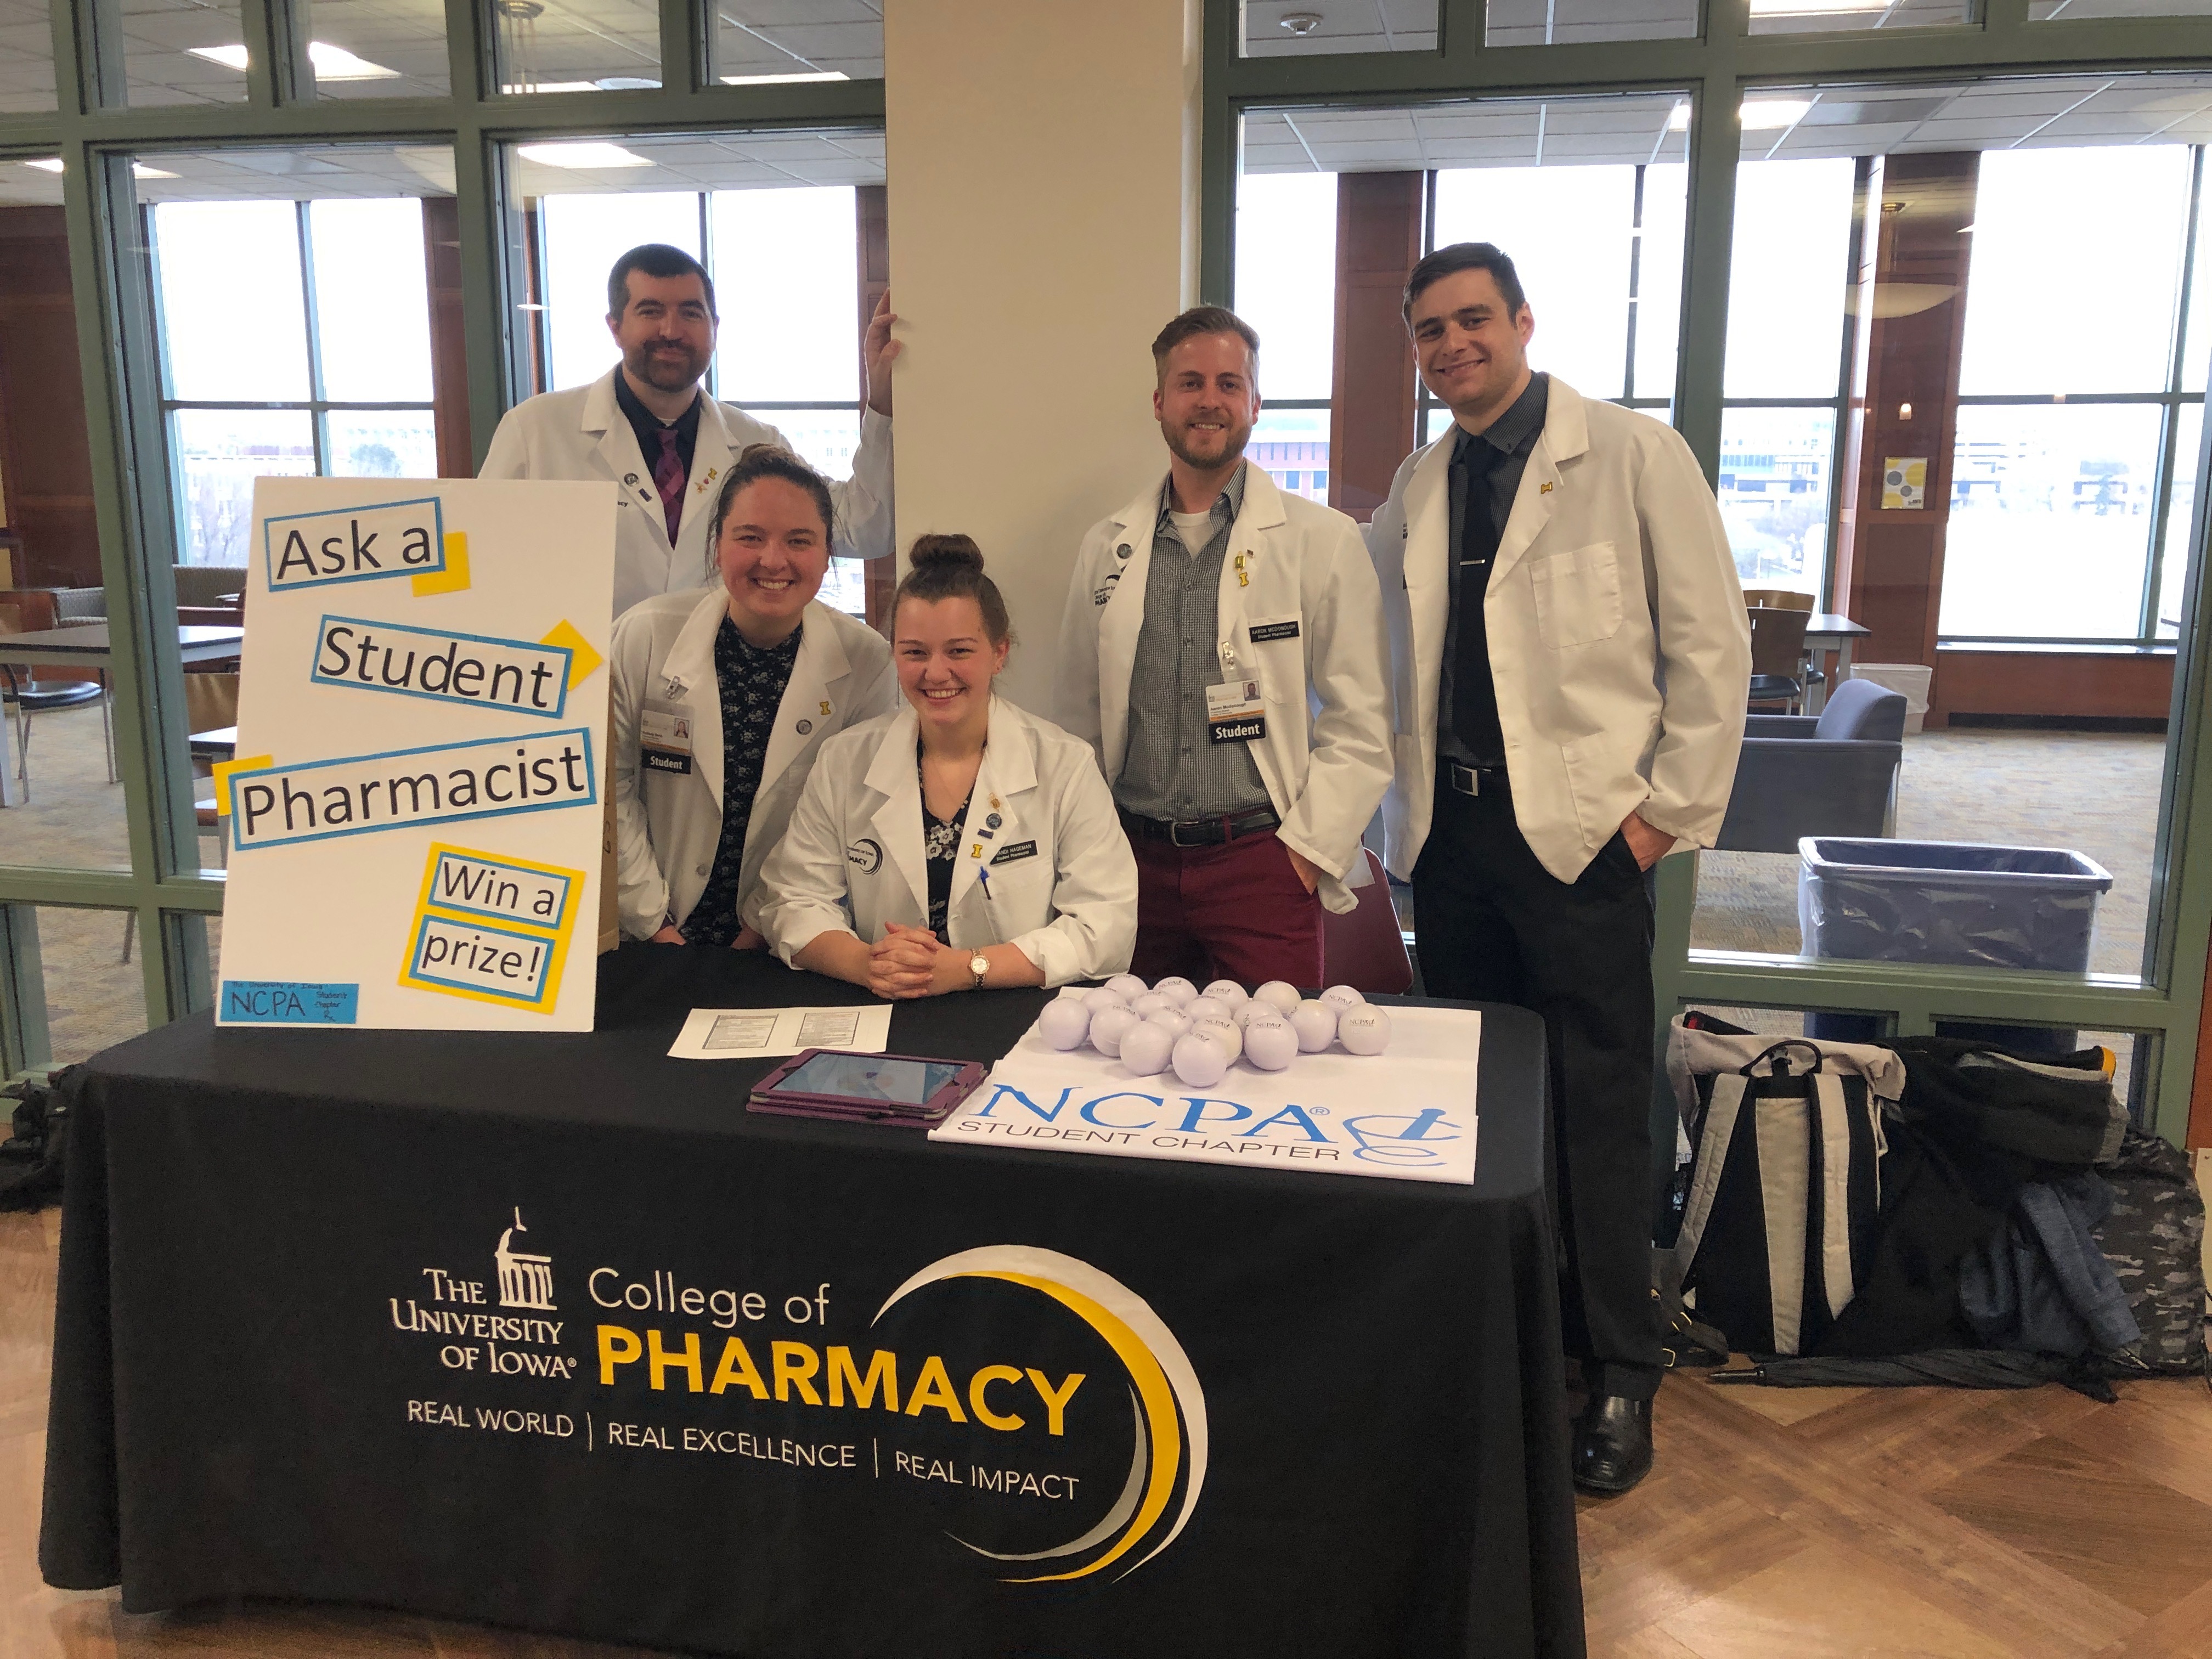 NCPA Ask a Student Pharmacist Event